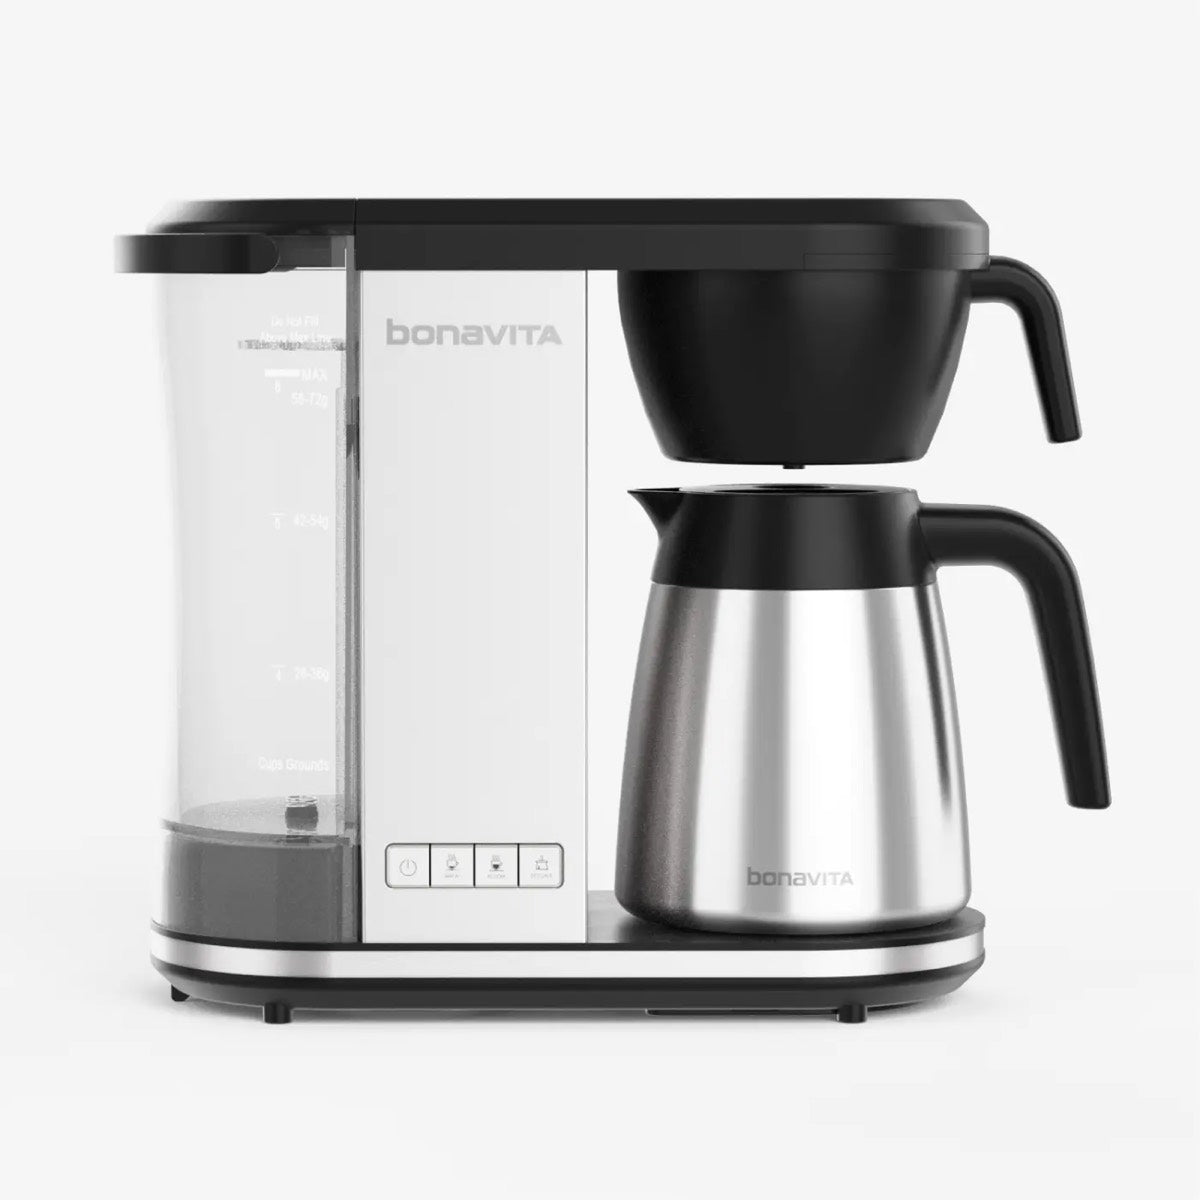 Bonavita Enthusiast Drip Coffee Brewer with Thermal Carafe - 8-Cup - Image 5